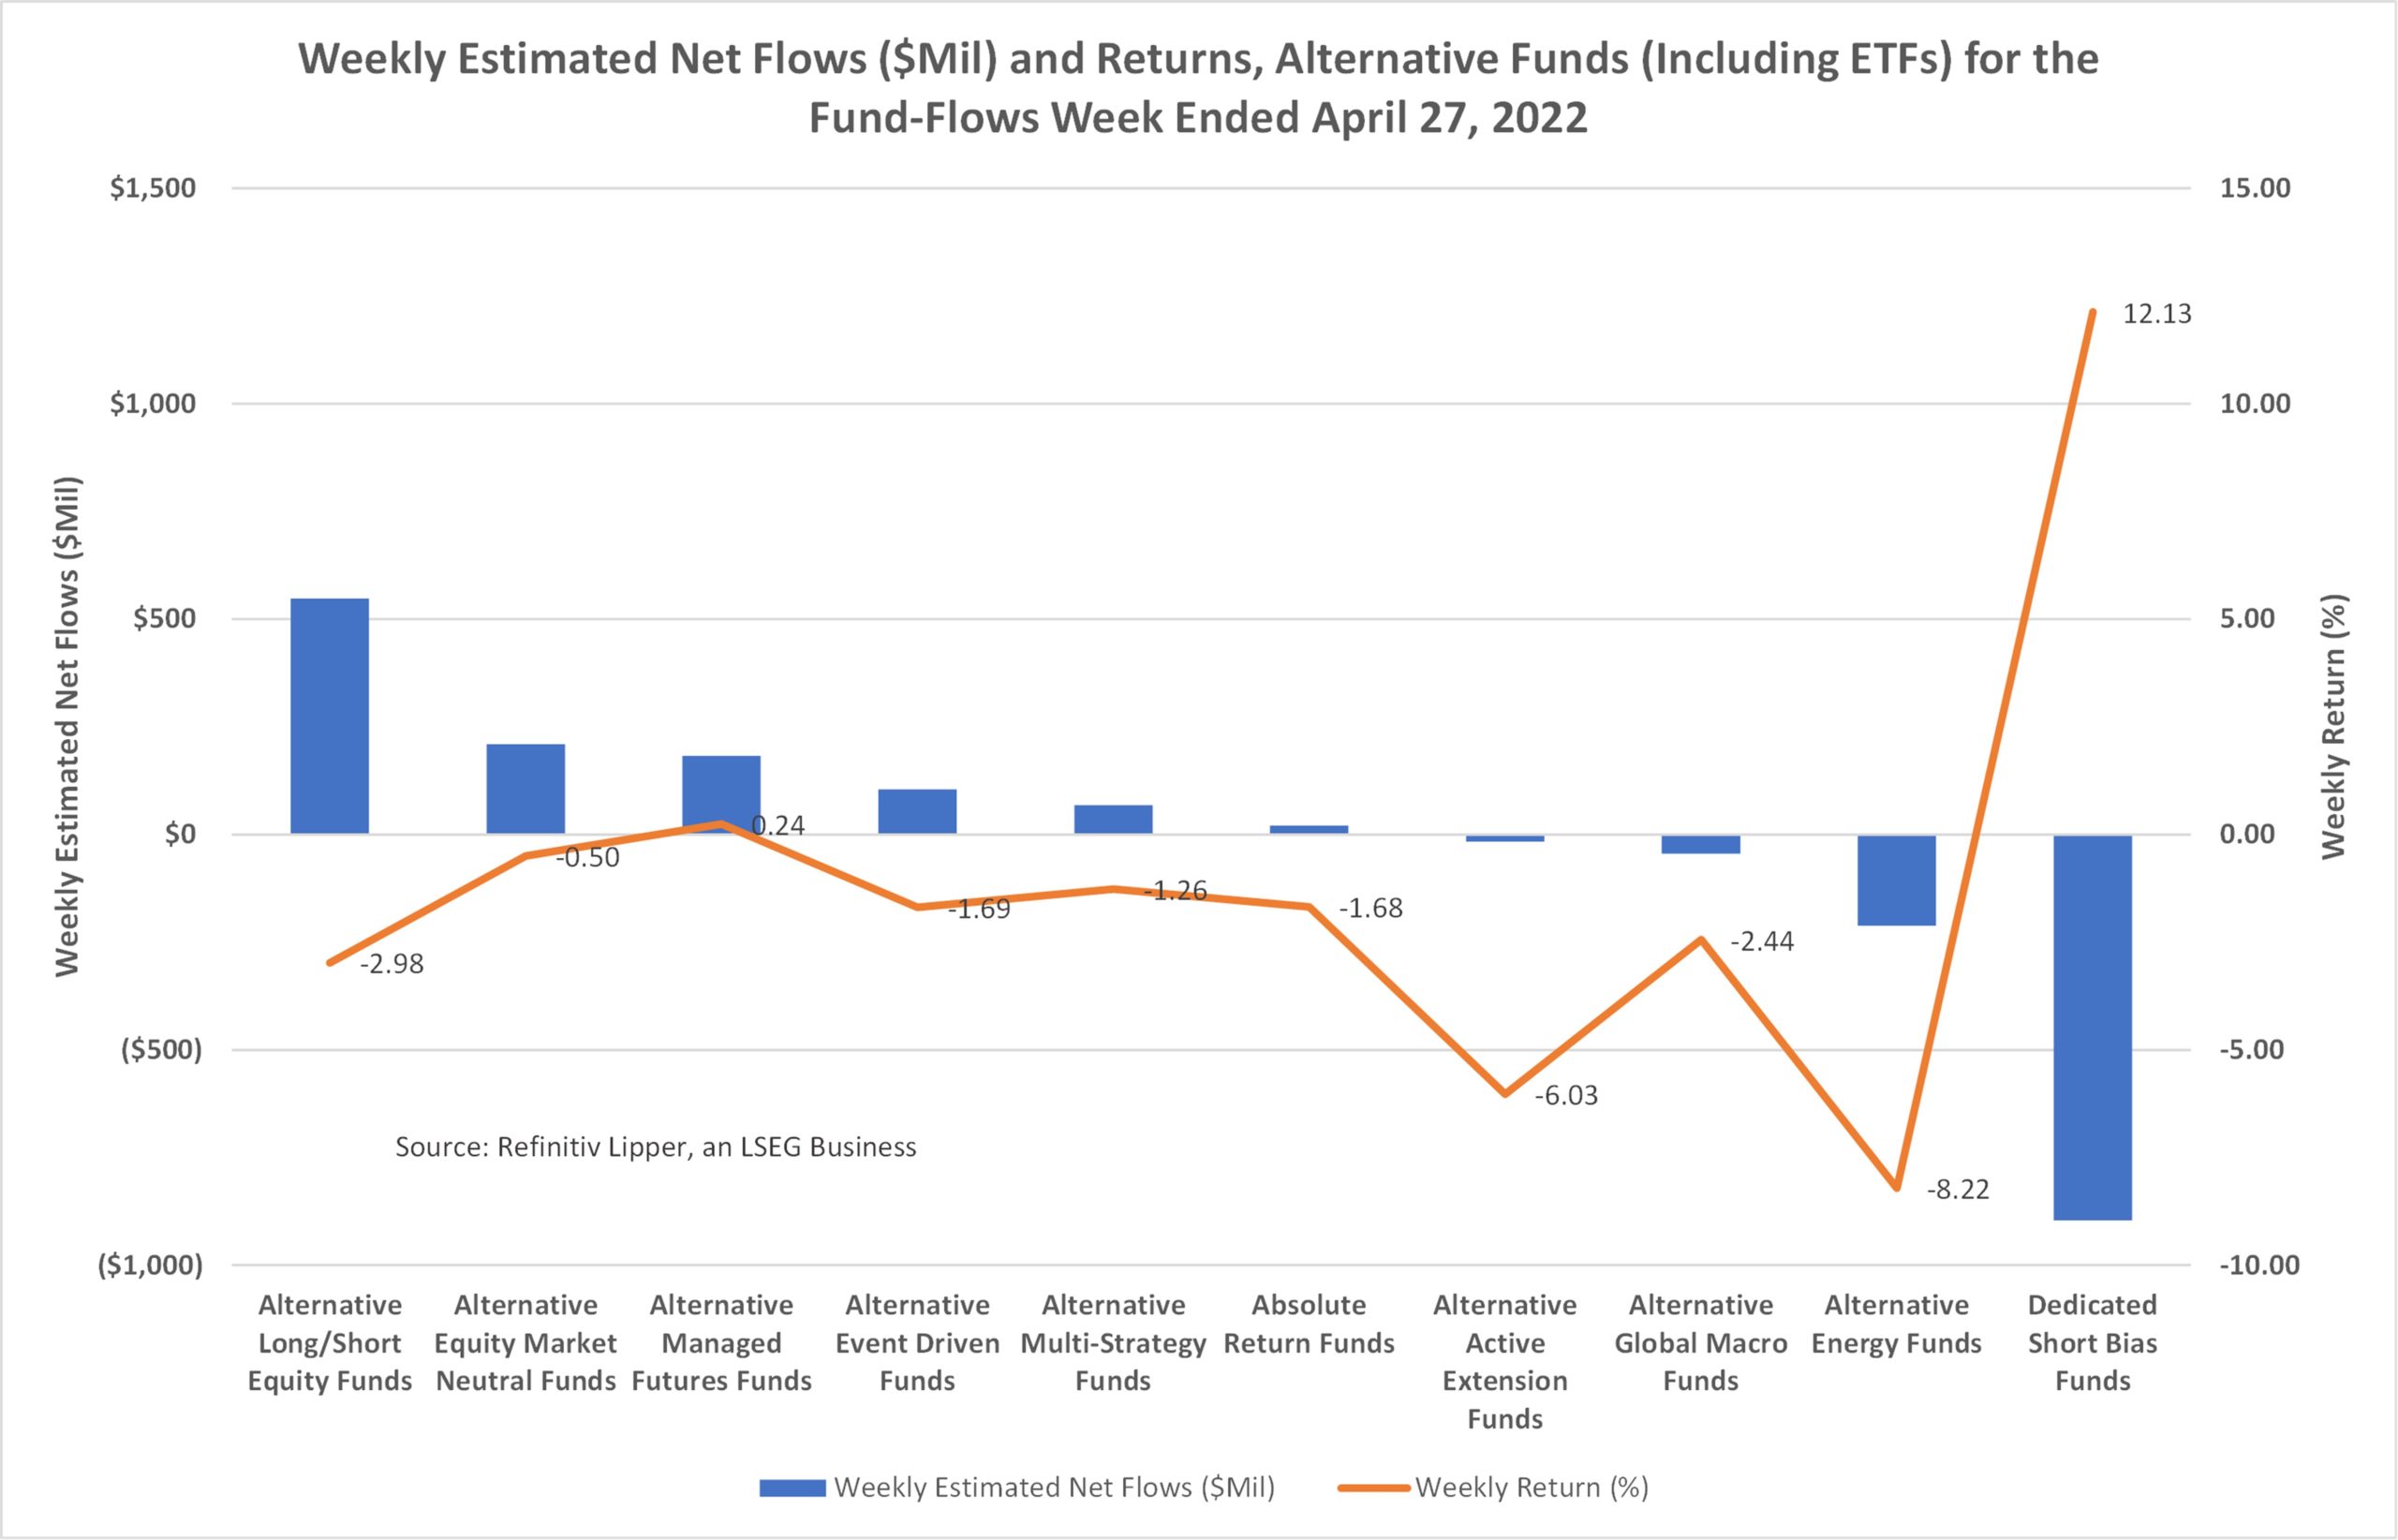 Weekly Flows and Returns Alternatives Funds Classfication